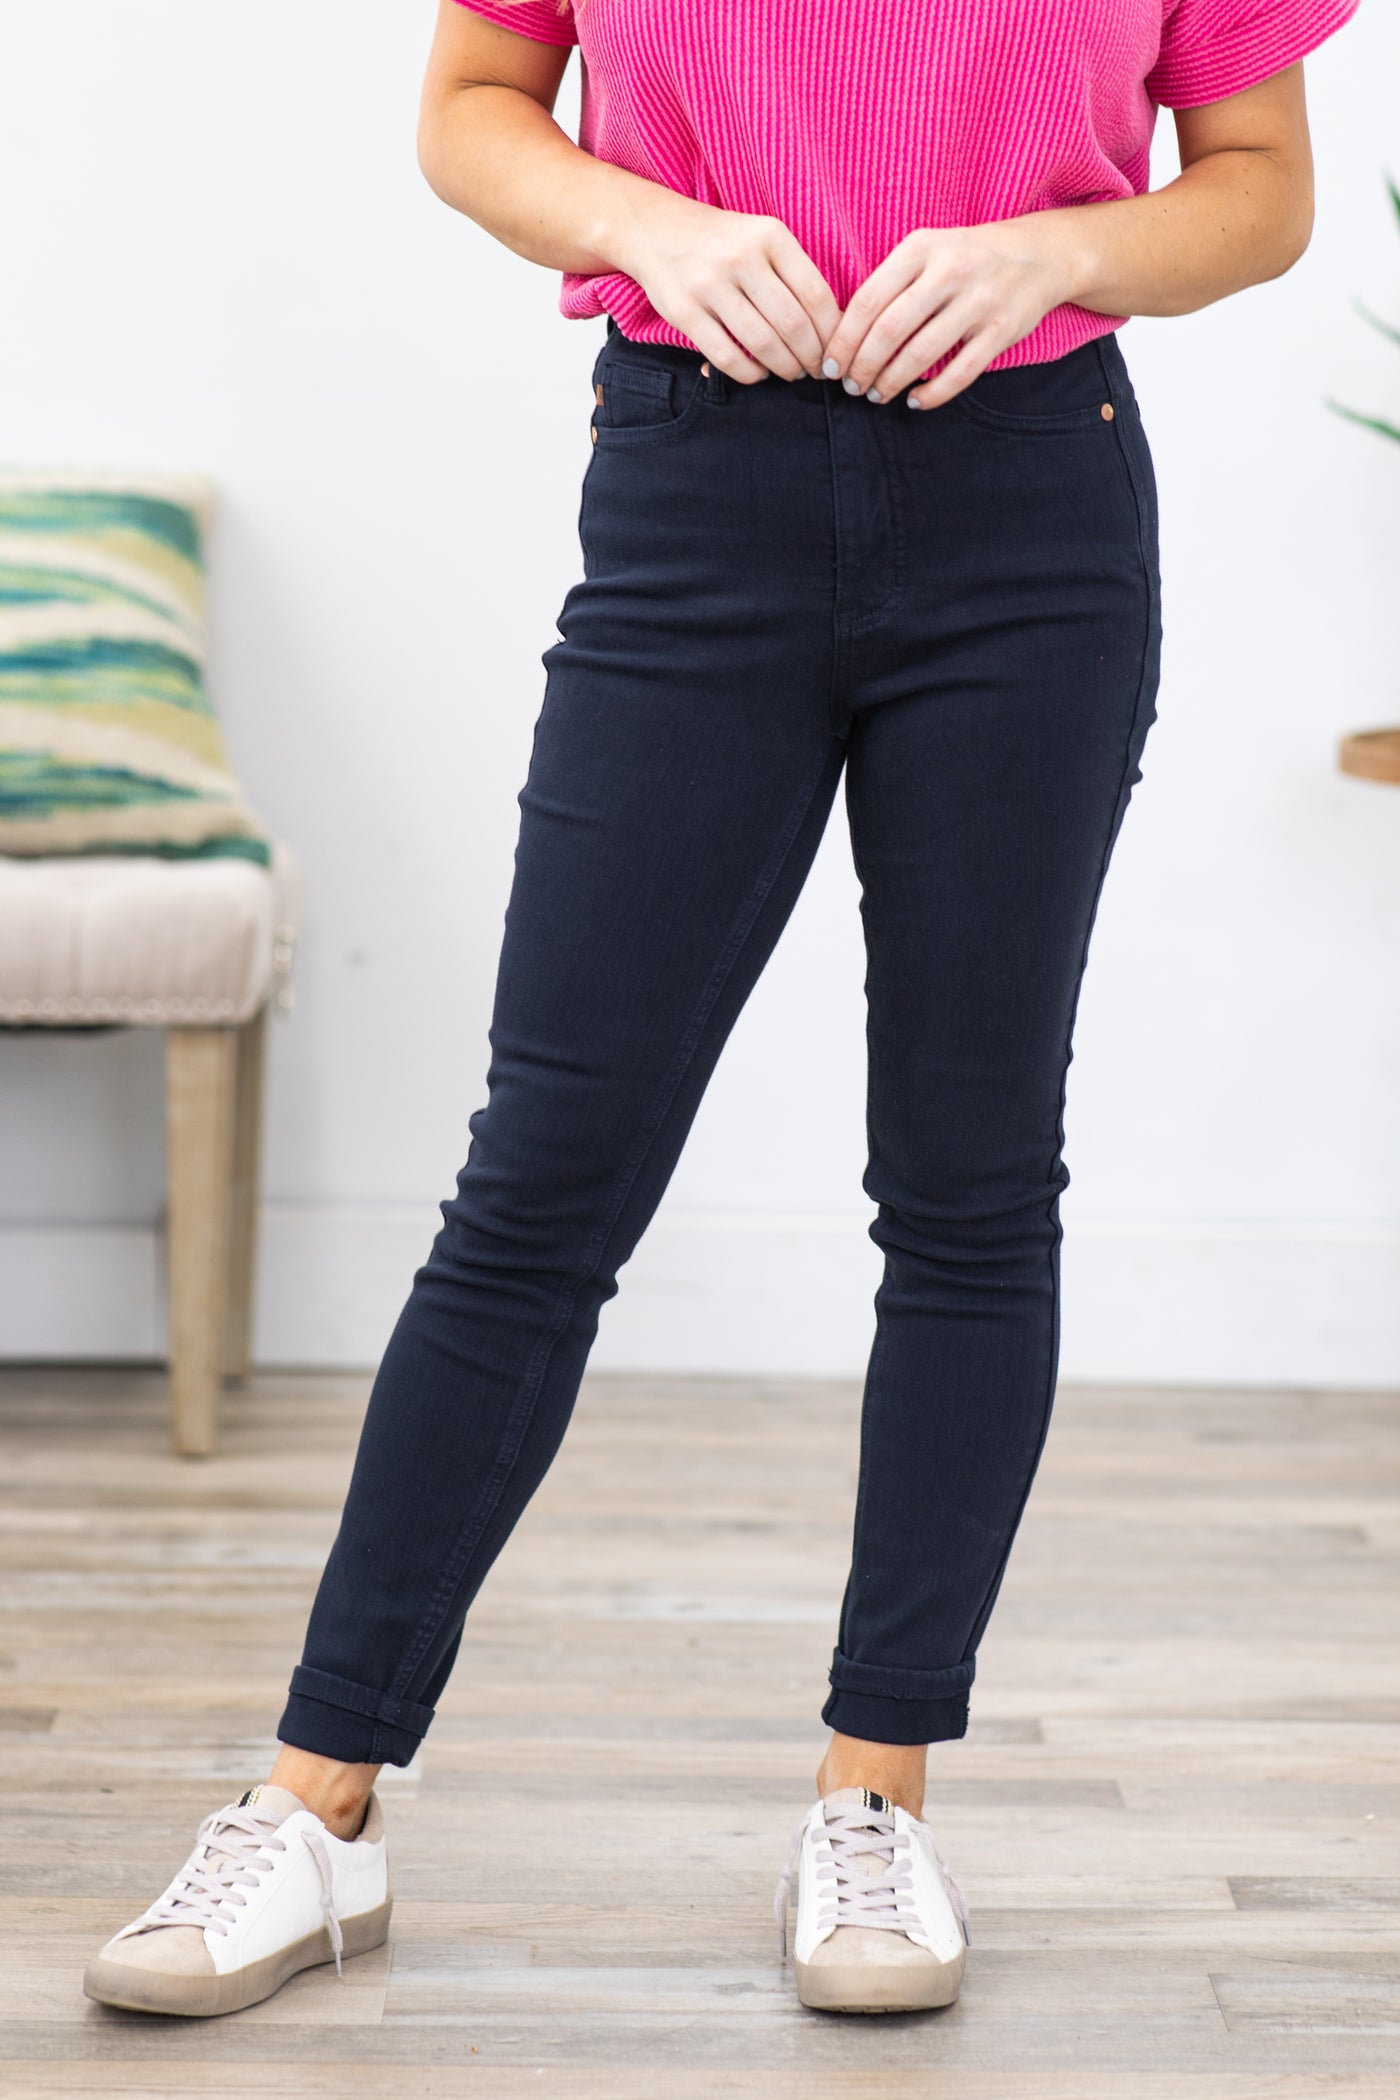 Black, High Waisted Jeans for Women with Tummy Control, Skinny